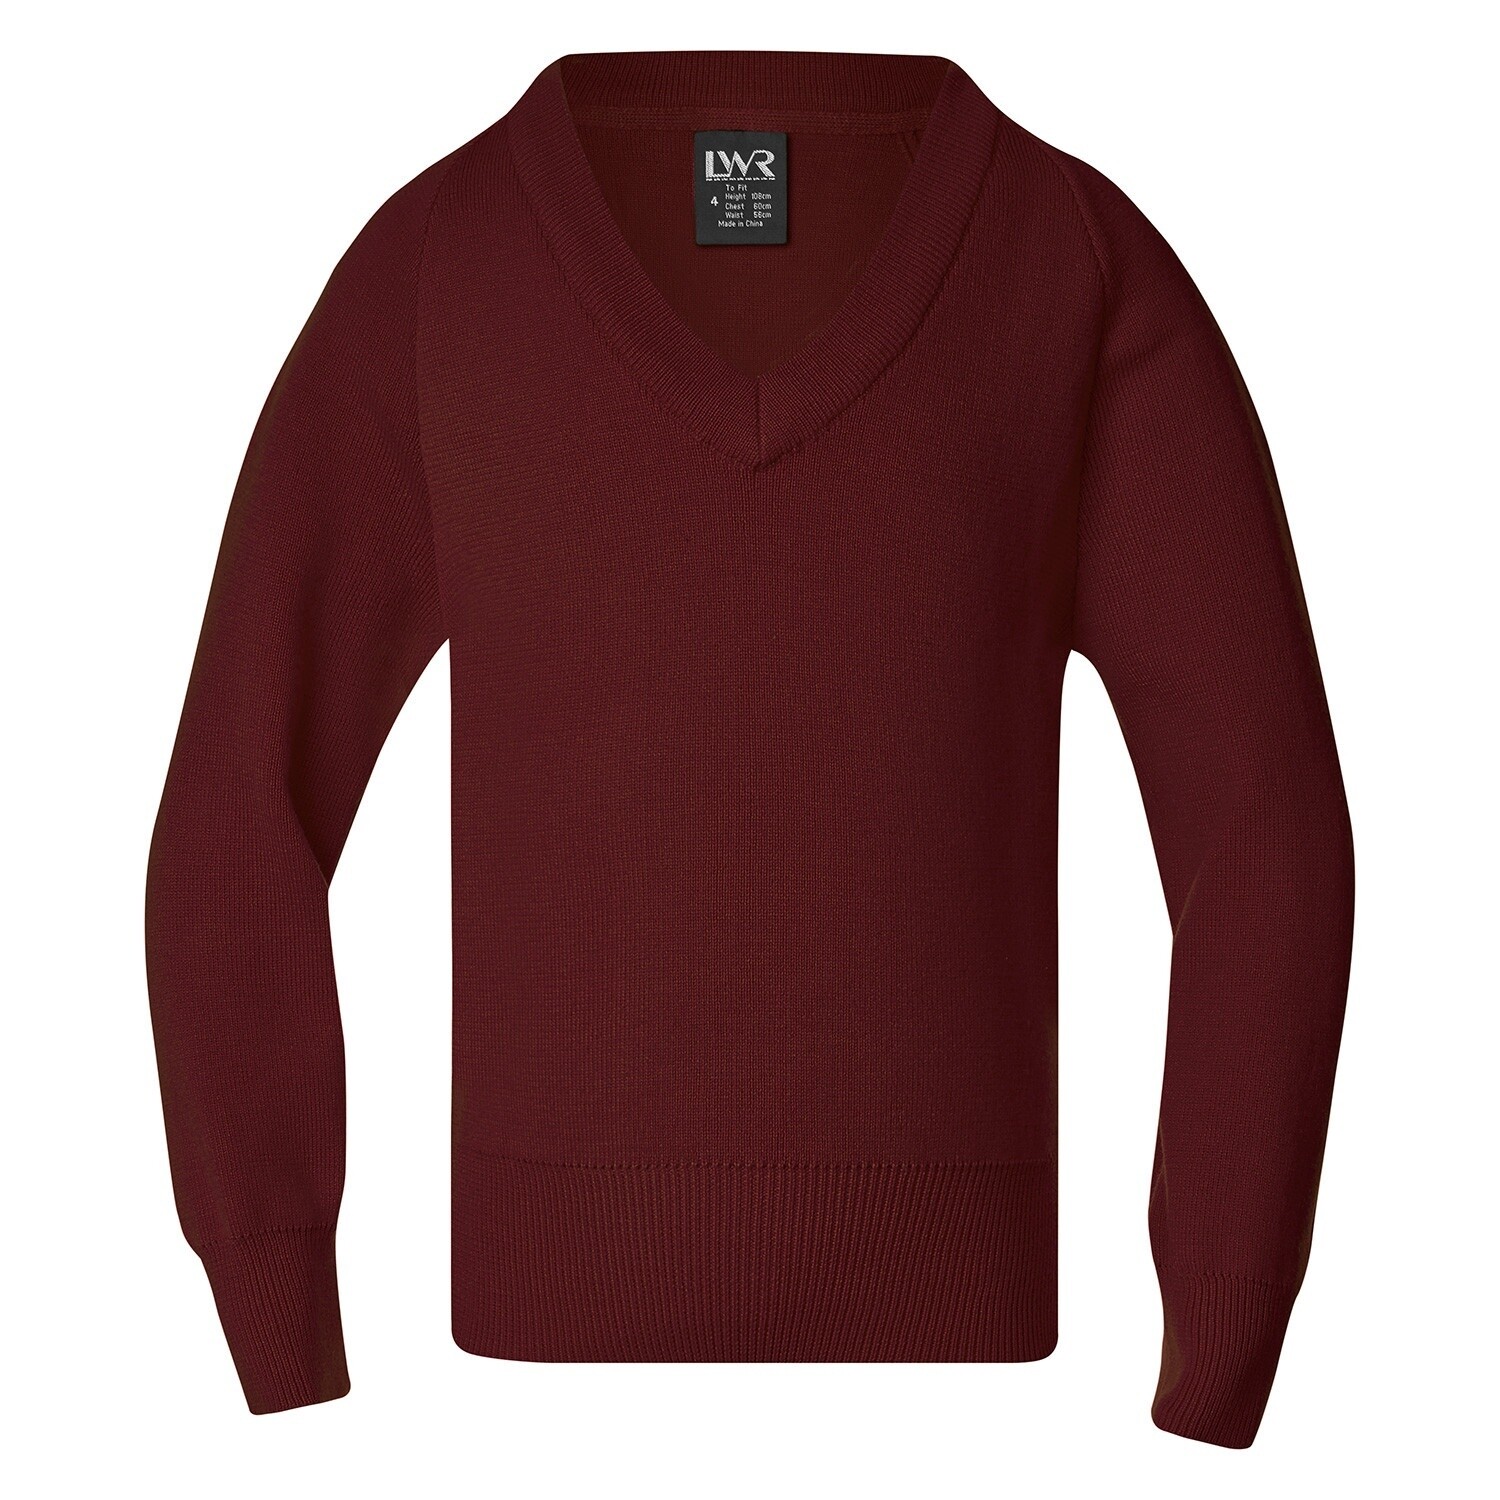 SS Peter and Paul - V Neck Jumper Maroon, Size: 4